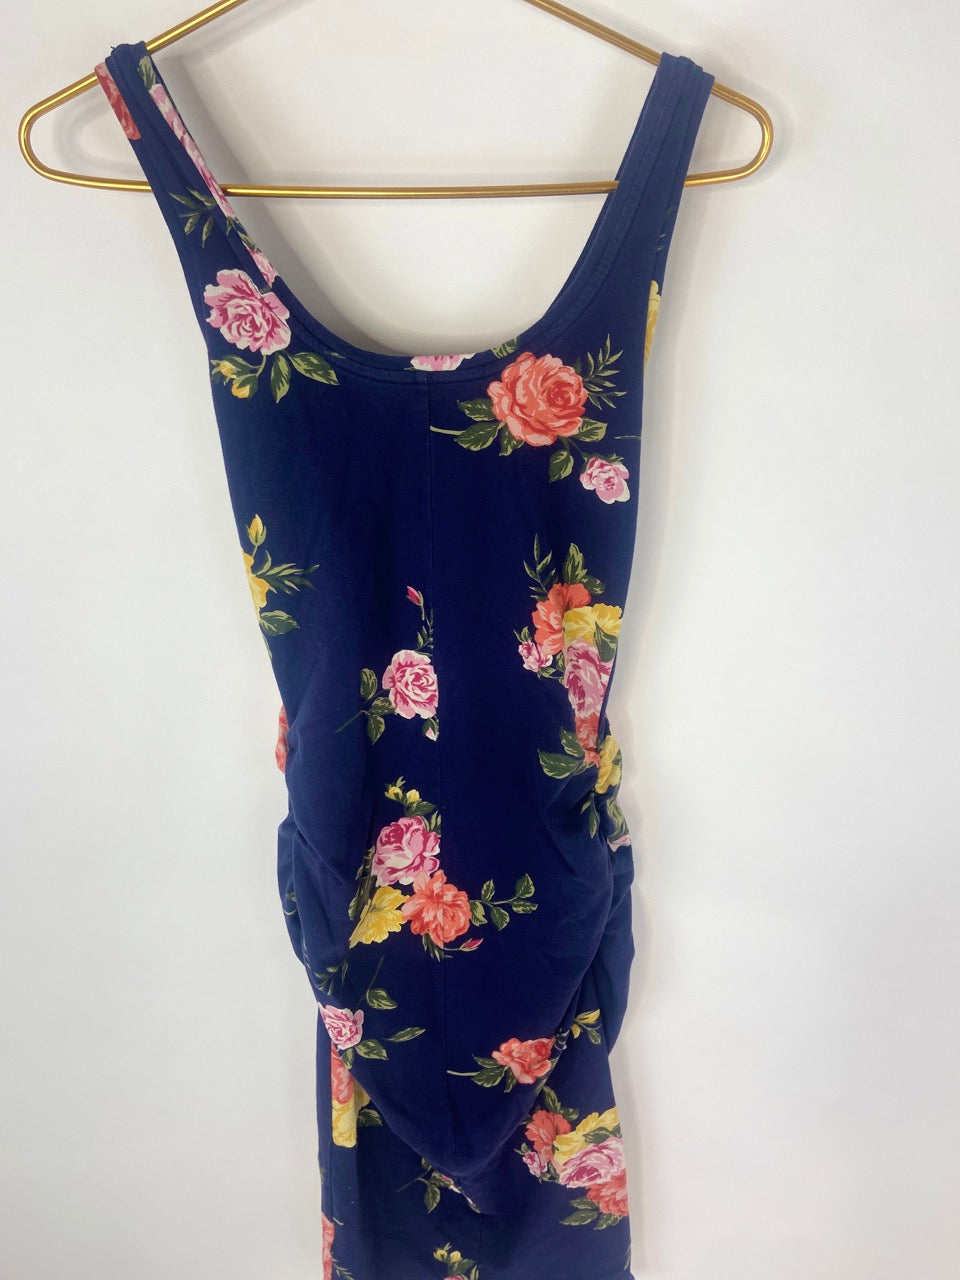 Navy Blue and Floral Rose maternity Dress- XS